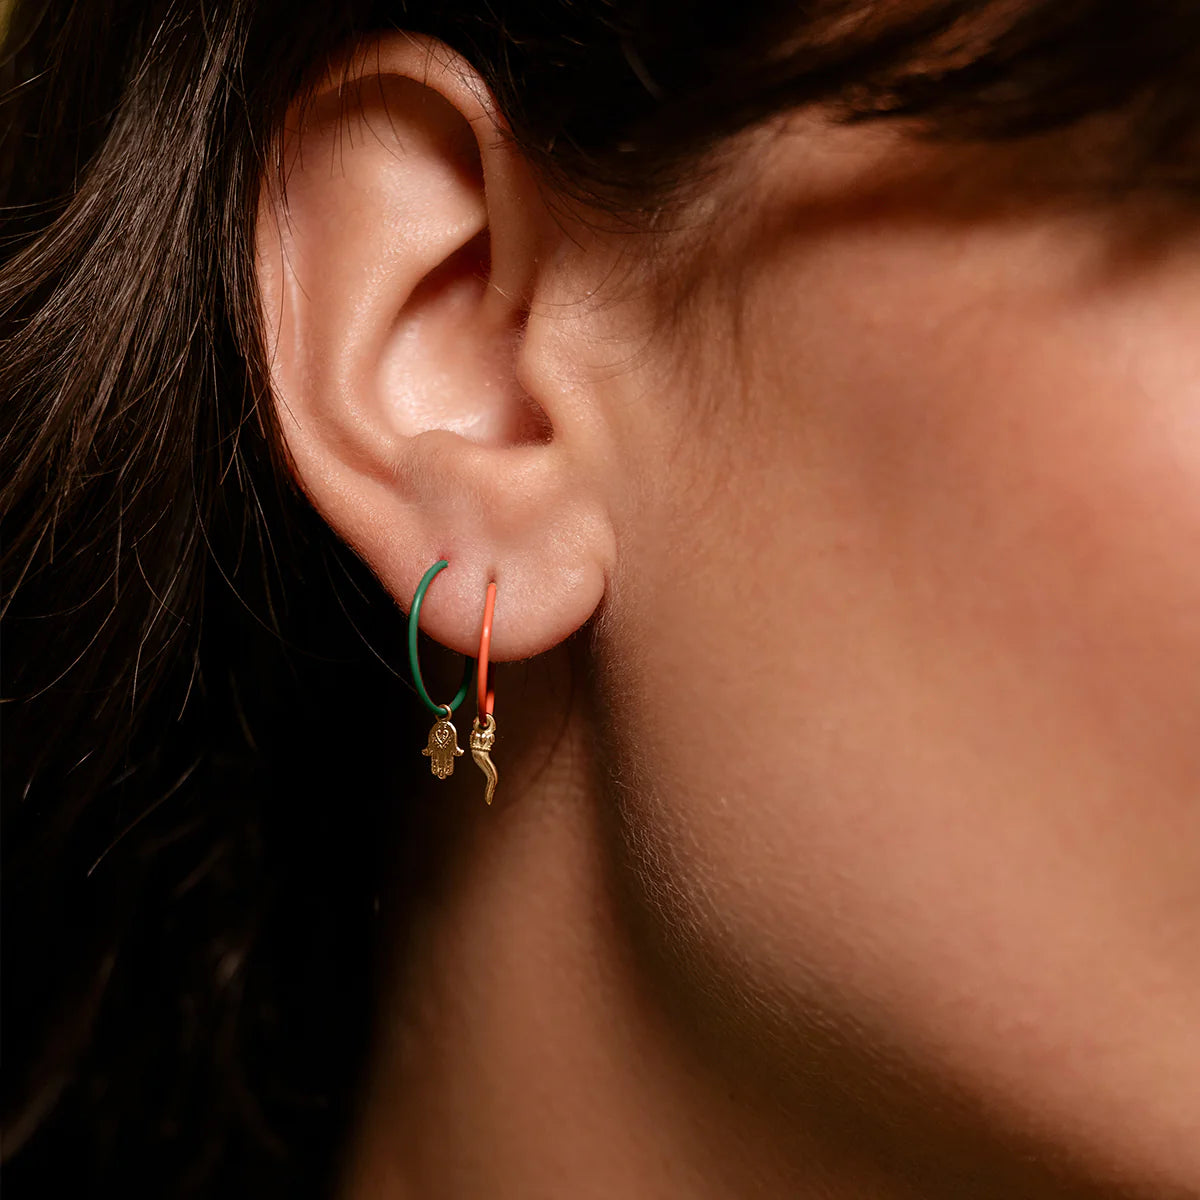 Mono Earring with 18kt gold hand of fatima and painted silver hoop - Moregola Fine Jewelry